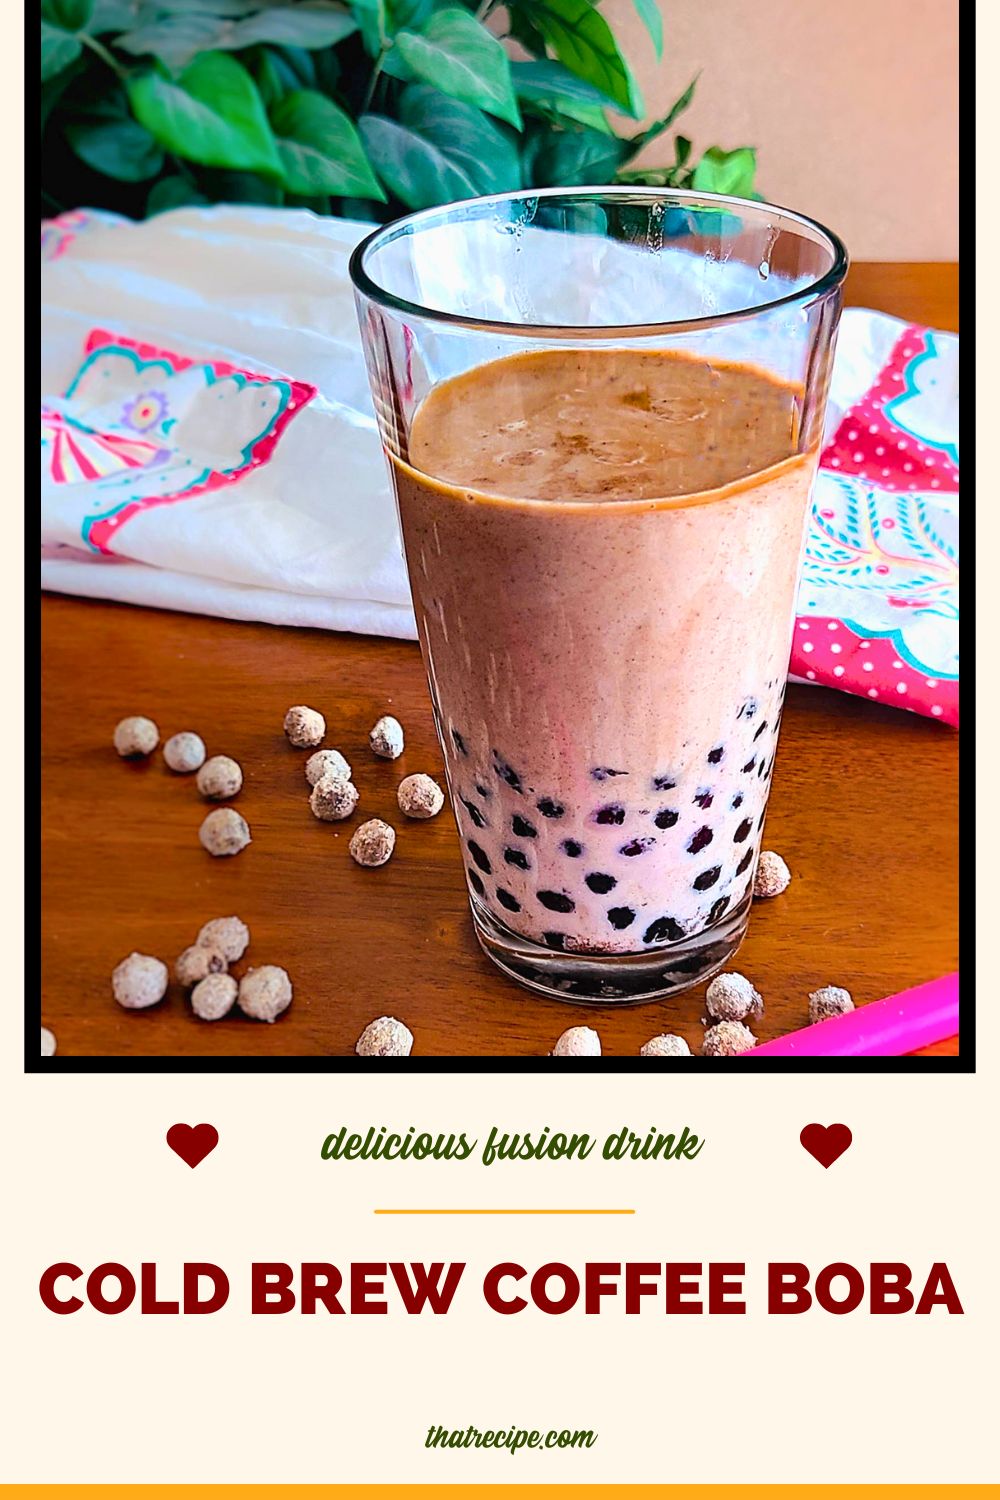 cup of cold brew coffee with boba pearls